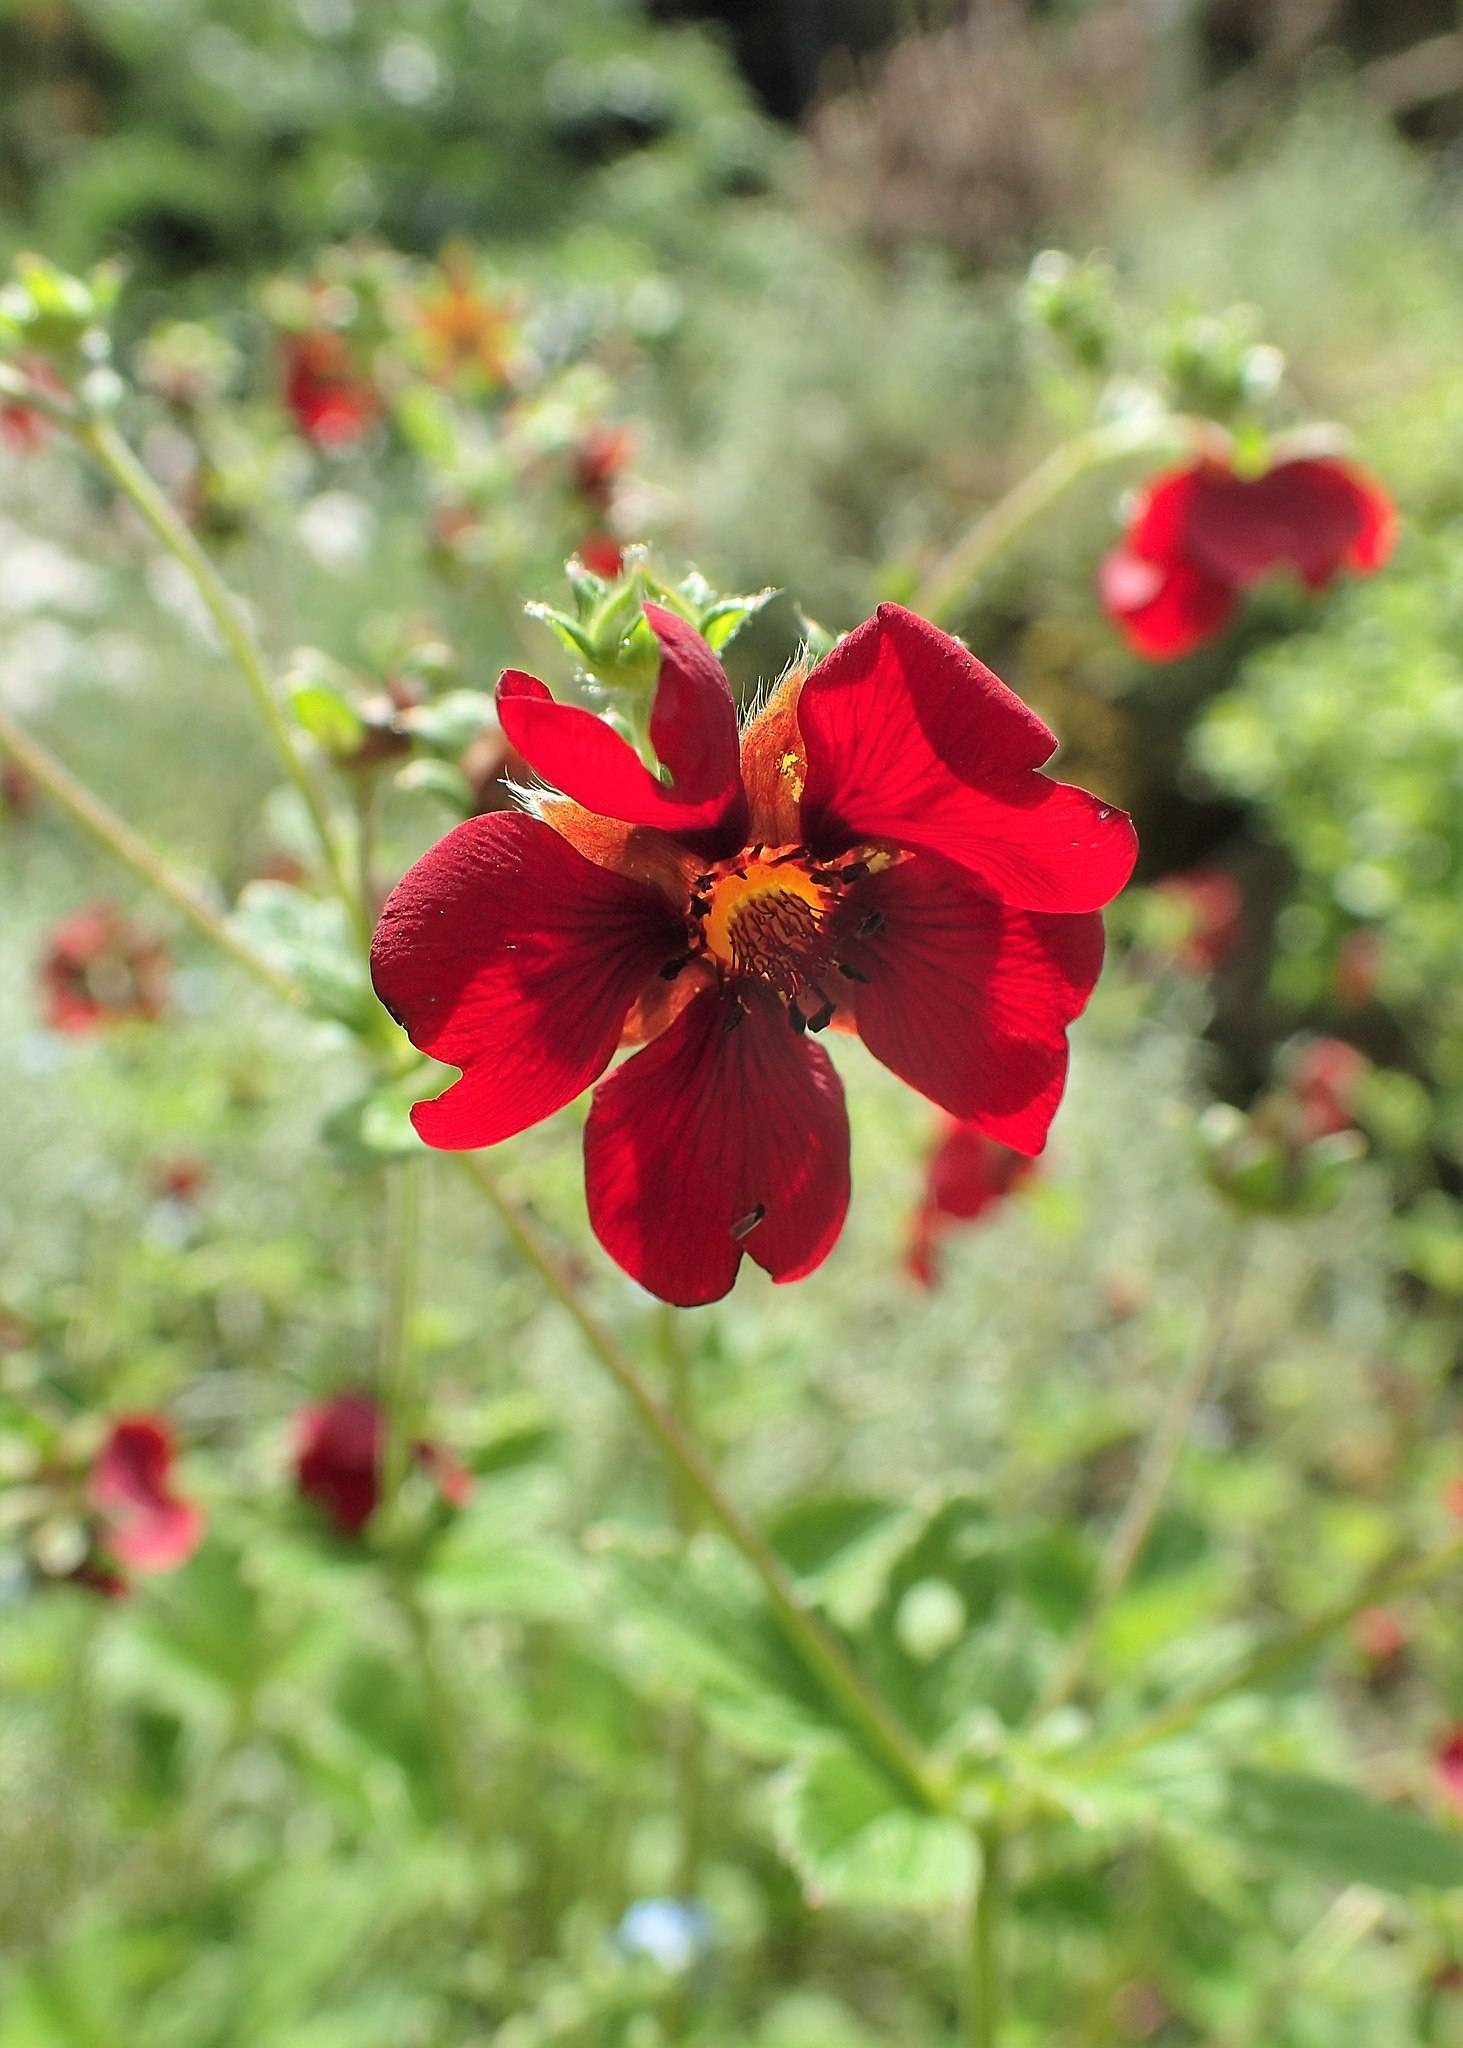 red-maroon flowers with orange center, black anthers, lime leaves and light-brown stems